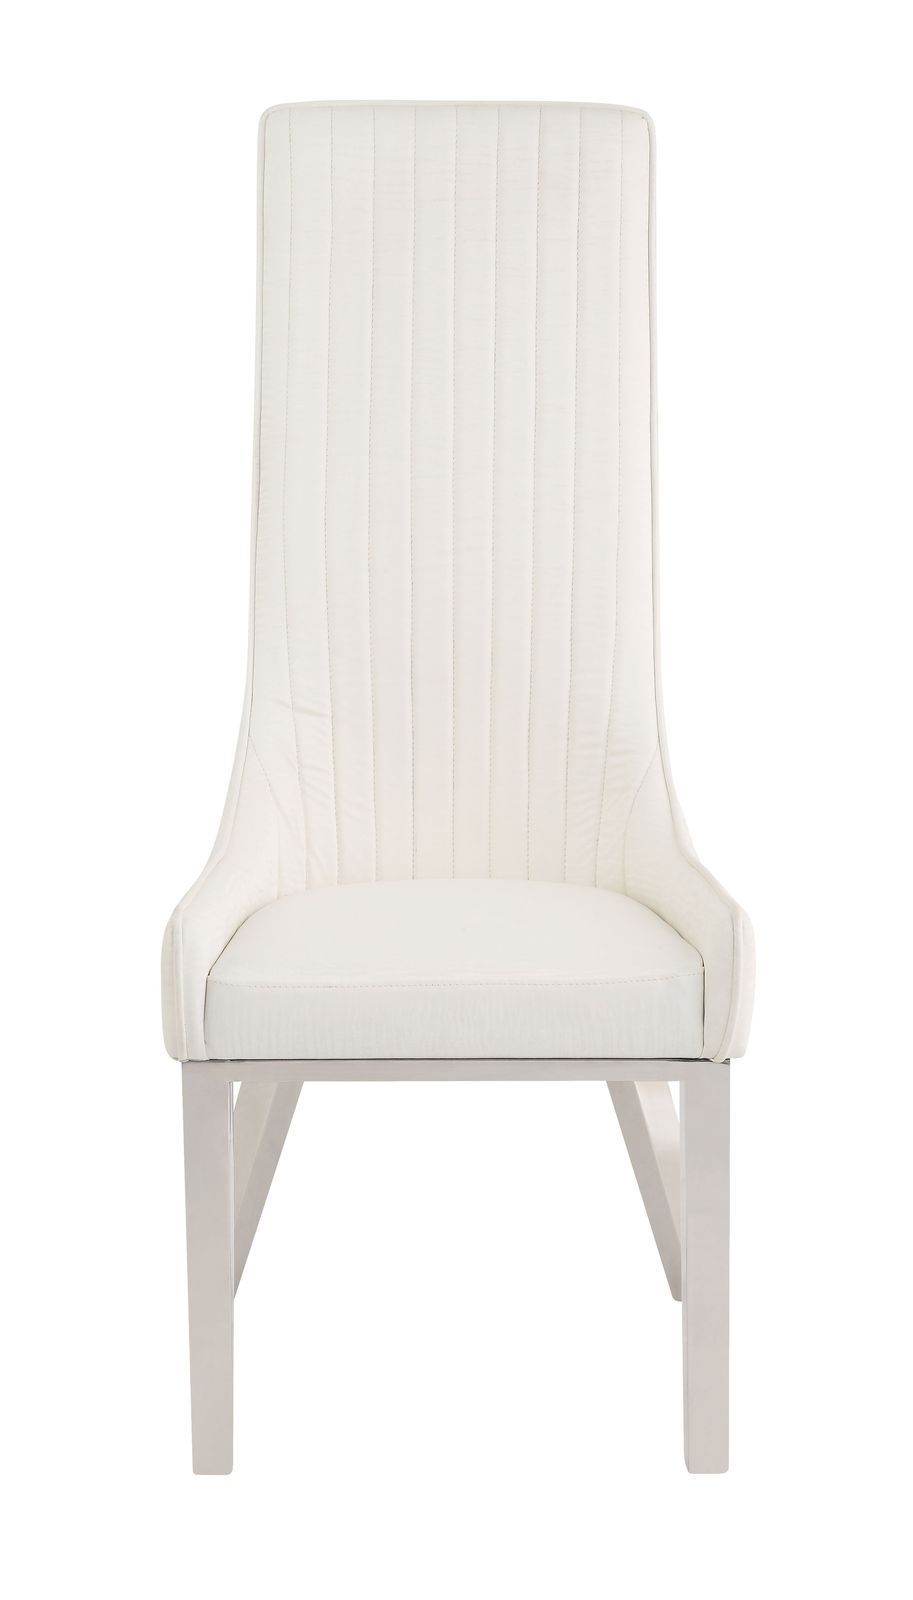 ACME Gianna Dining Chair (Set-2), White PU & Stainless Steel 72473 - Home Elegance USA